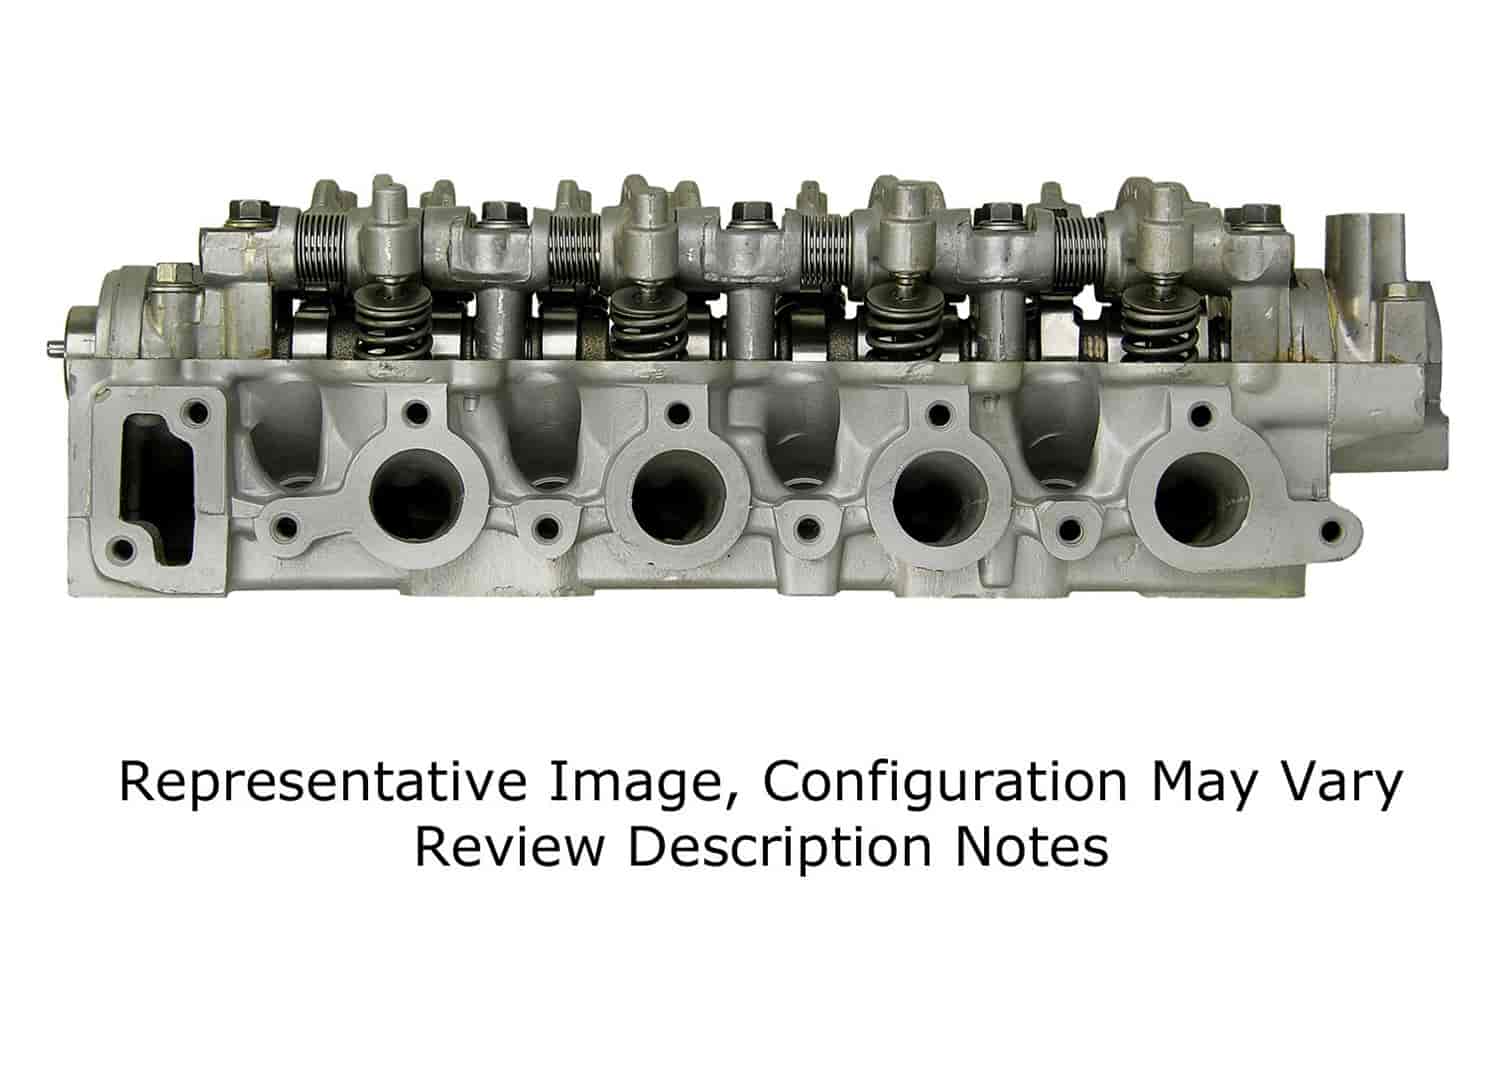 Remanufactured Cylinder Head for 1993-1994 Hyundai Scoupe with Turbocharged 1.5L L4